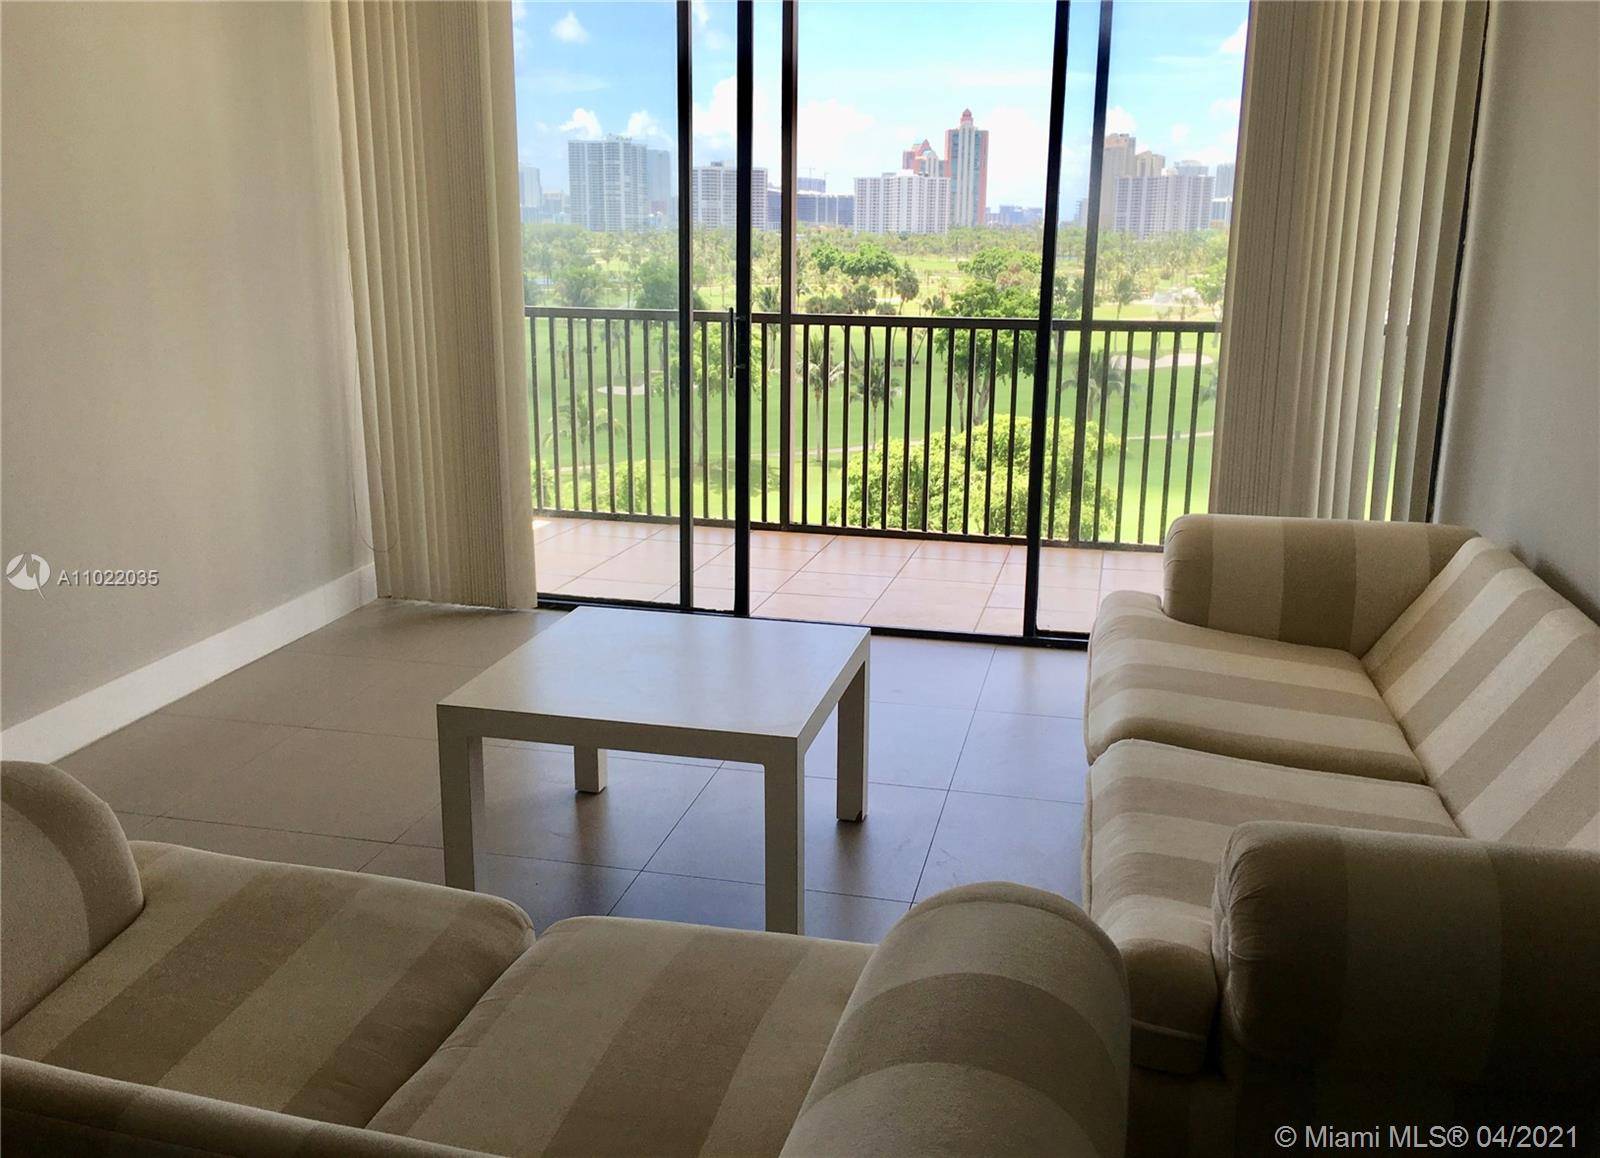 Gorgeous view of Turnberry resort golf course completely remodeled 2 beds 2 baths apartment in the heart of Aventura, ultra modern bathrooms kitchen.